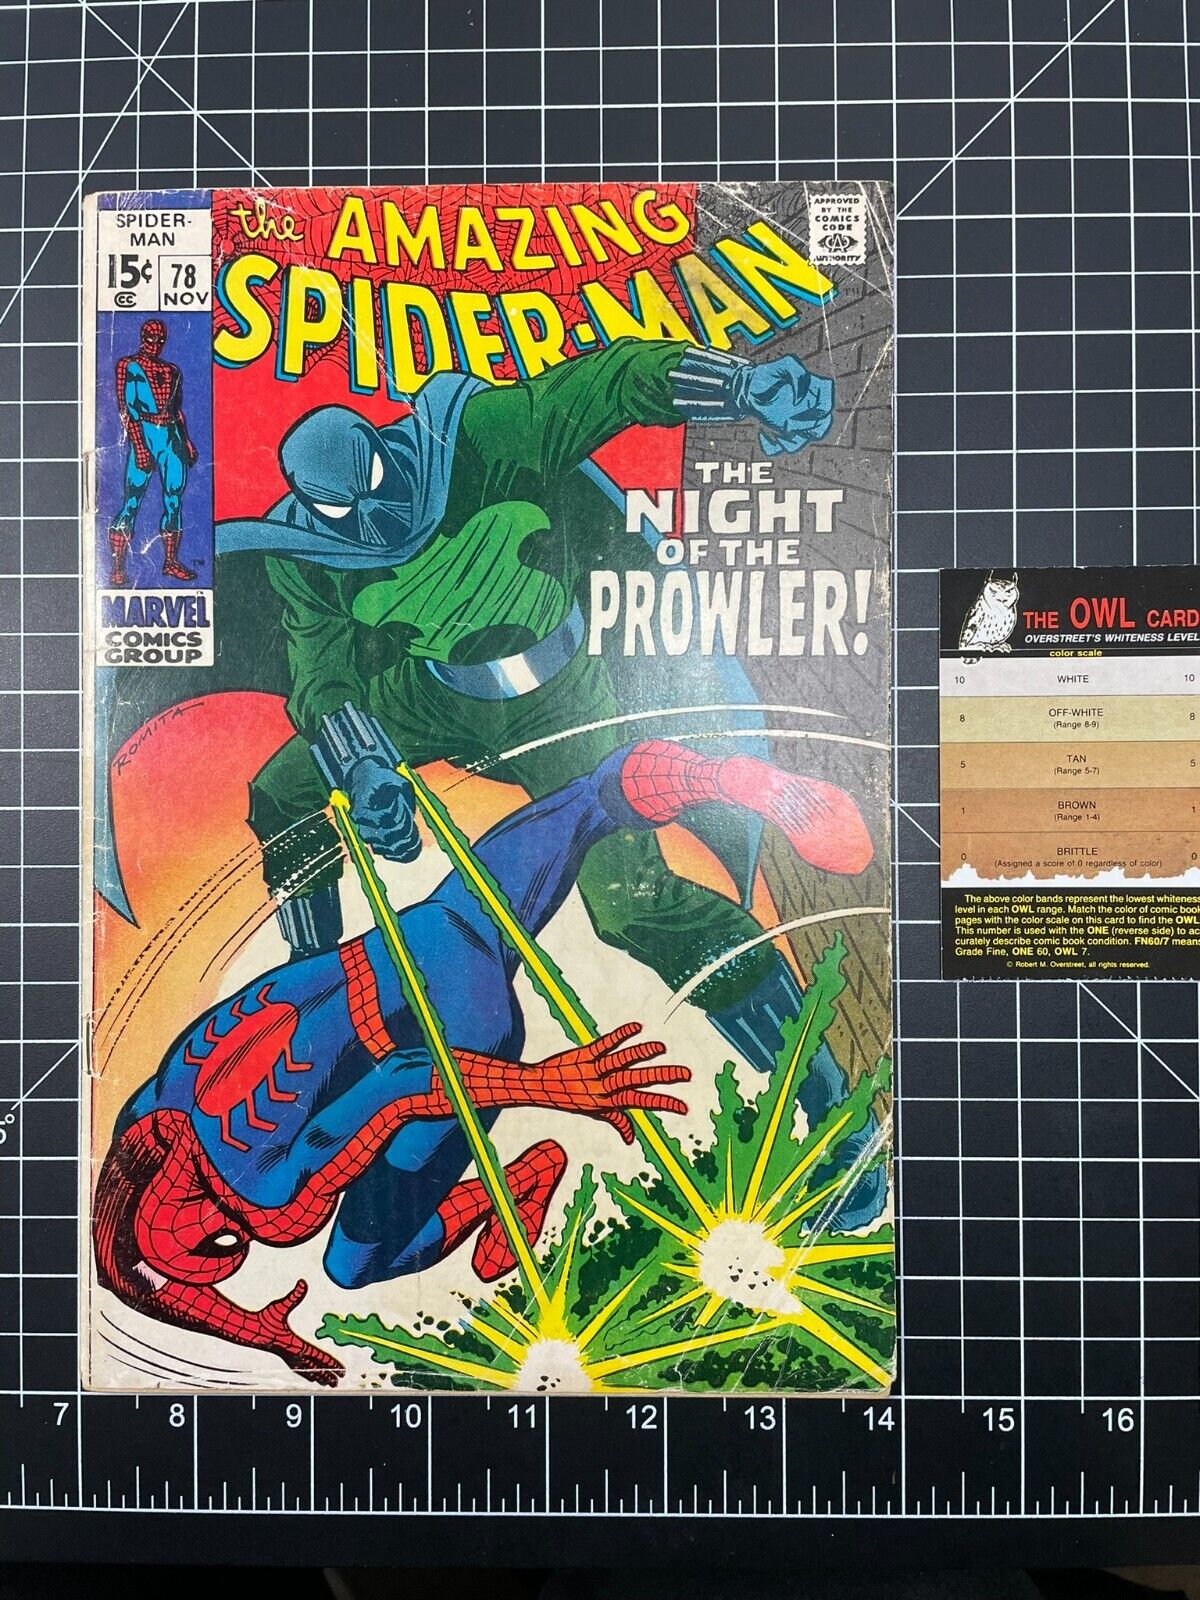 Amazing Spider-man #78 - 1st appearance of The Prowler